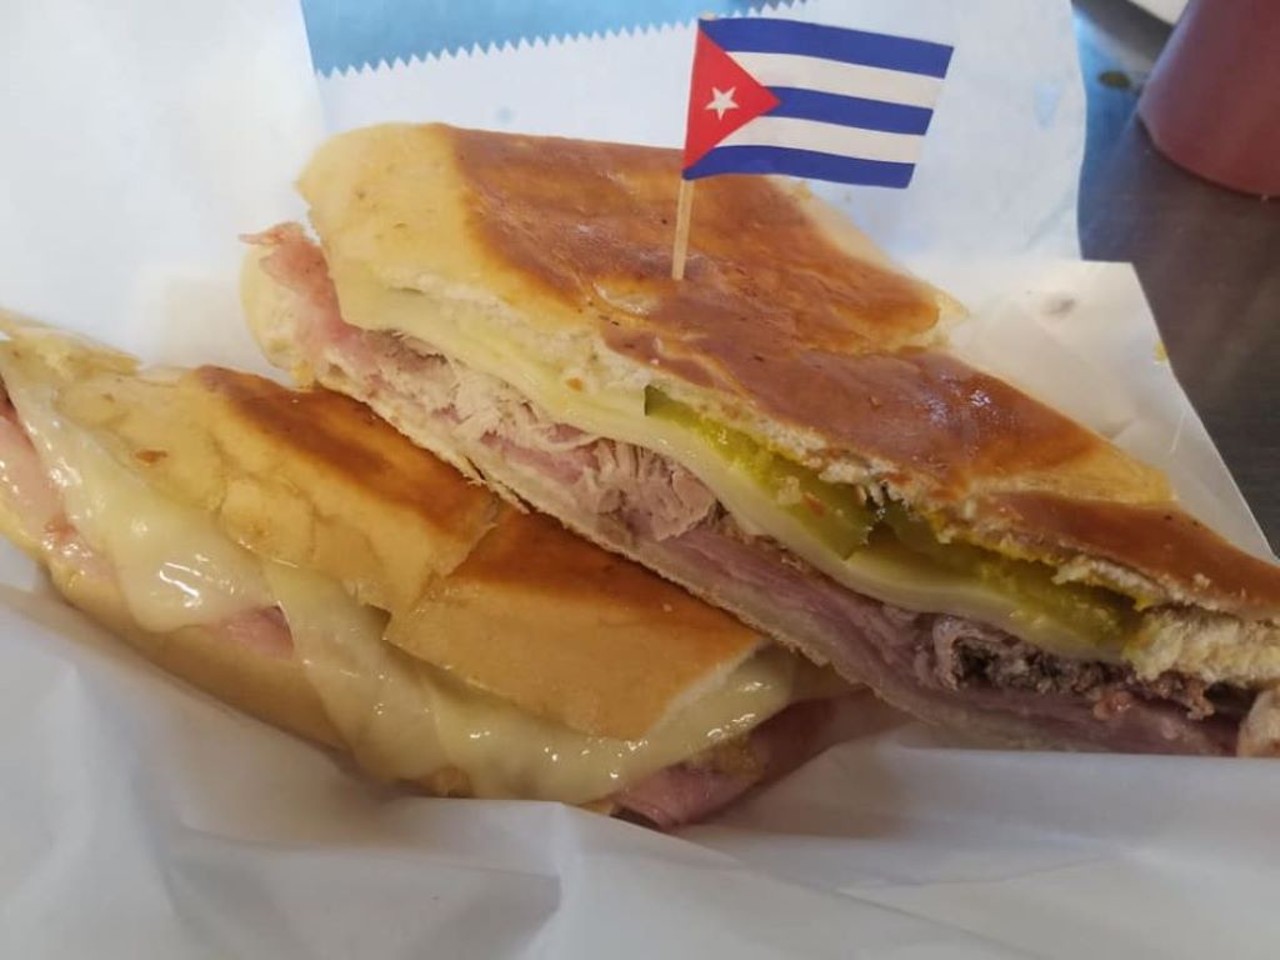 El Cubanito Subs 
2301 N. Forsyth Road
Customers can either head over to their brick-and-mortar store, or follow their social media to find out where their food truck is to try their delicious Cubans. 
Photo via El Cubanito Subs/Facebook